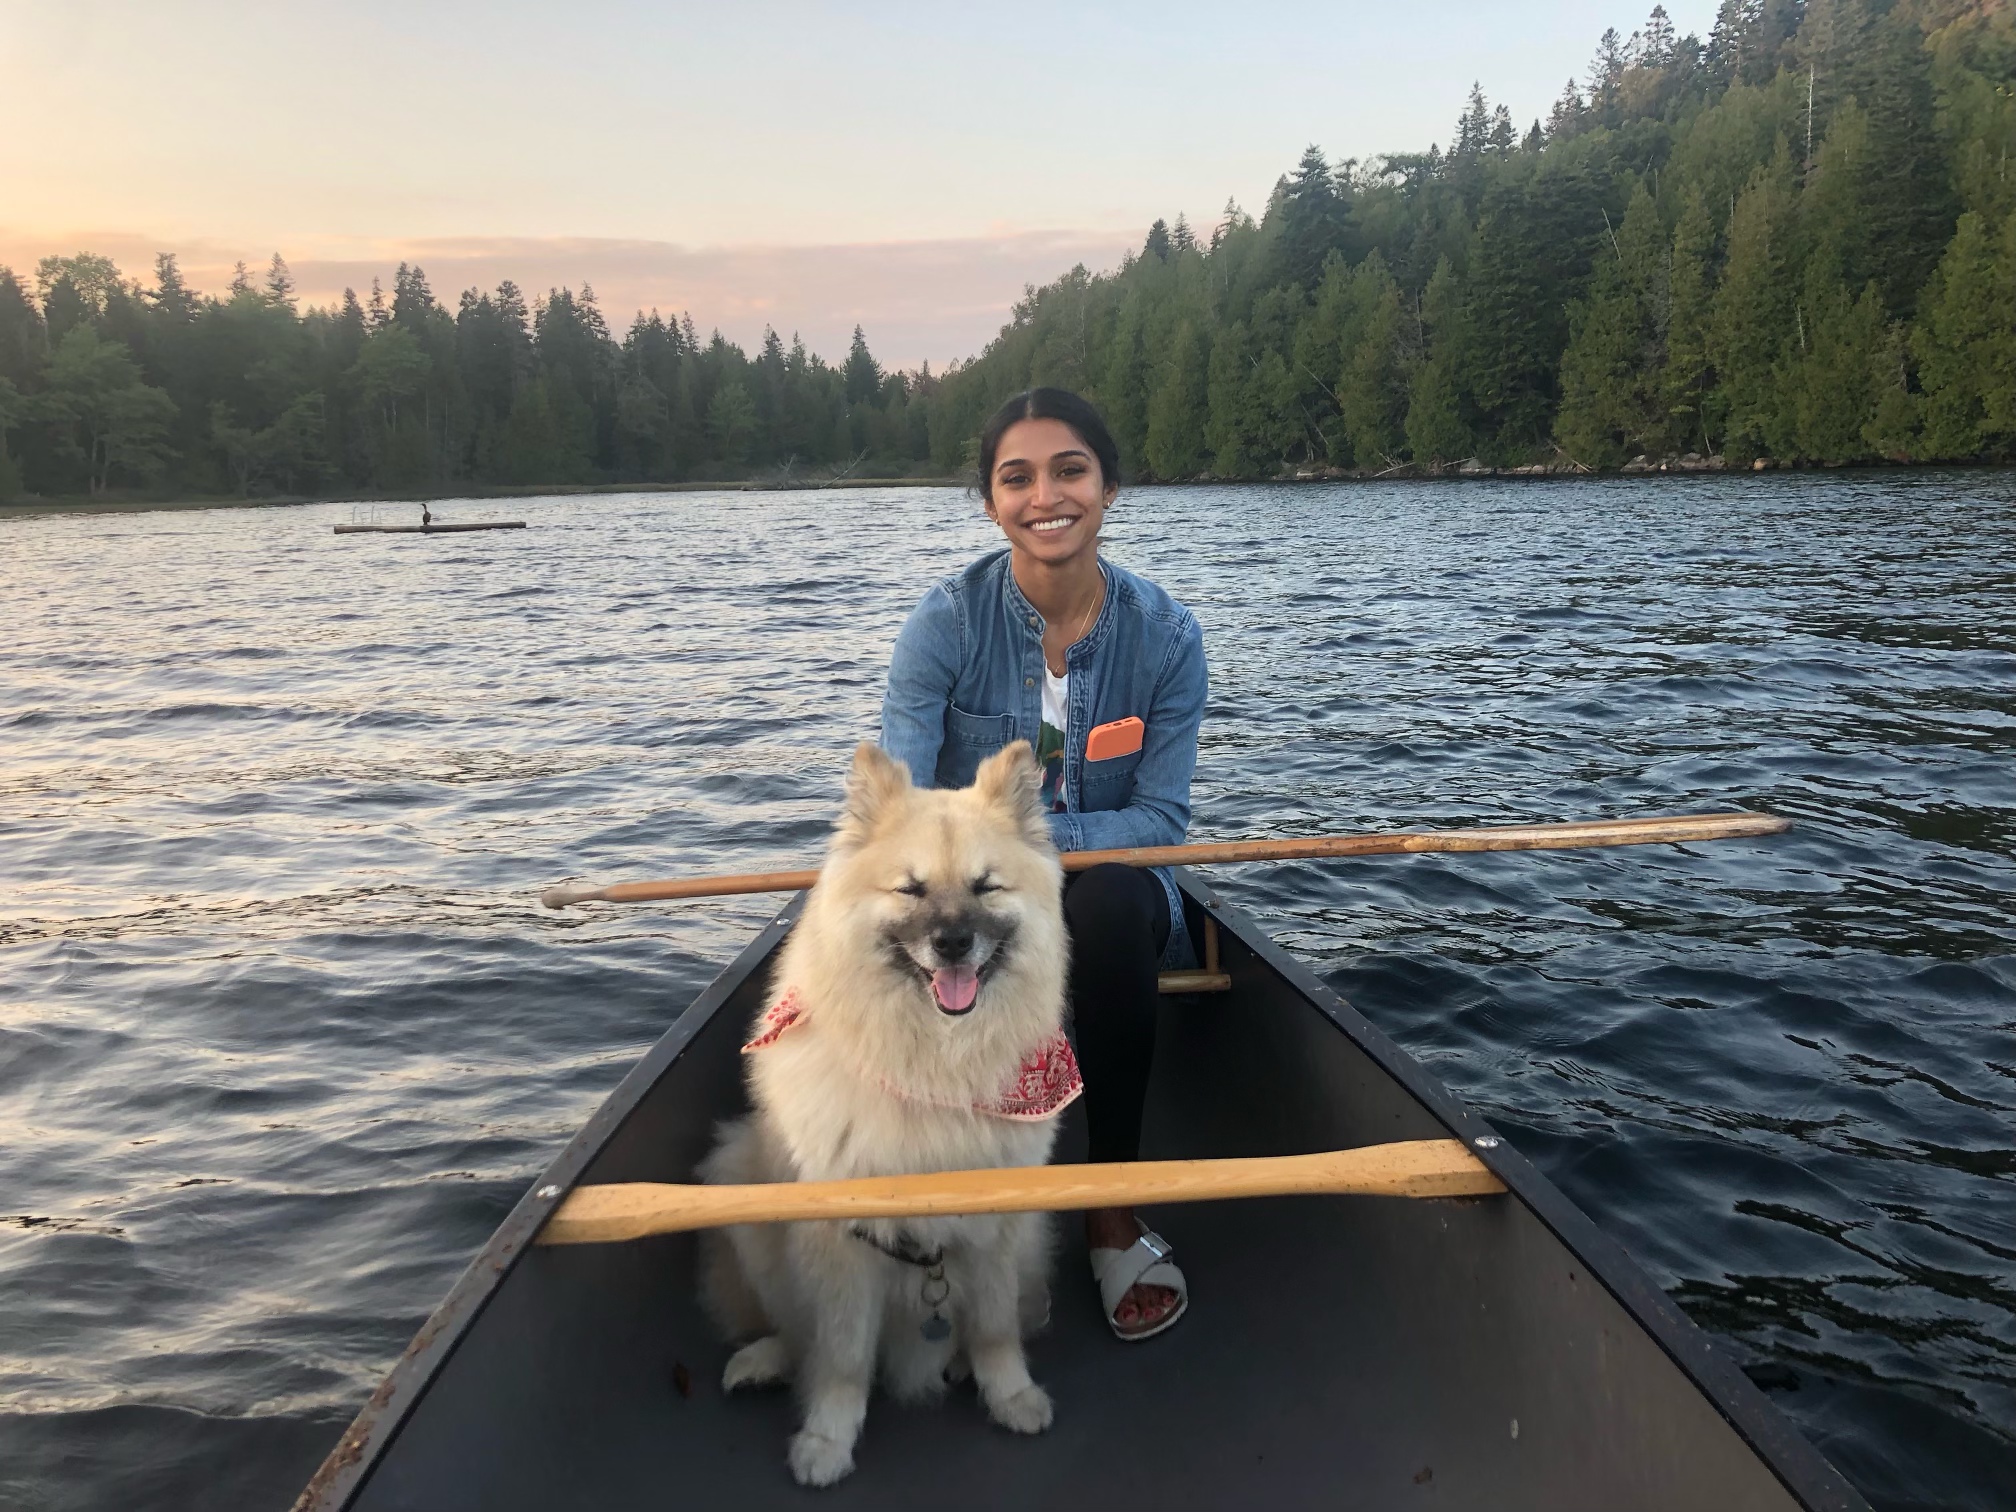 Photo of Mili and her dog on a canoe on a lake